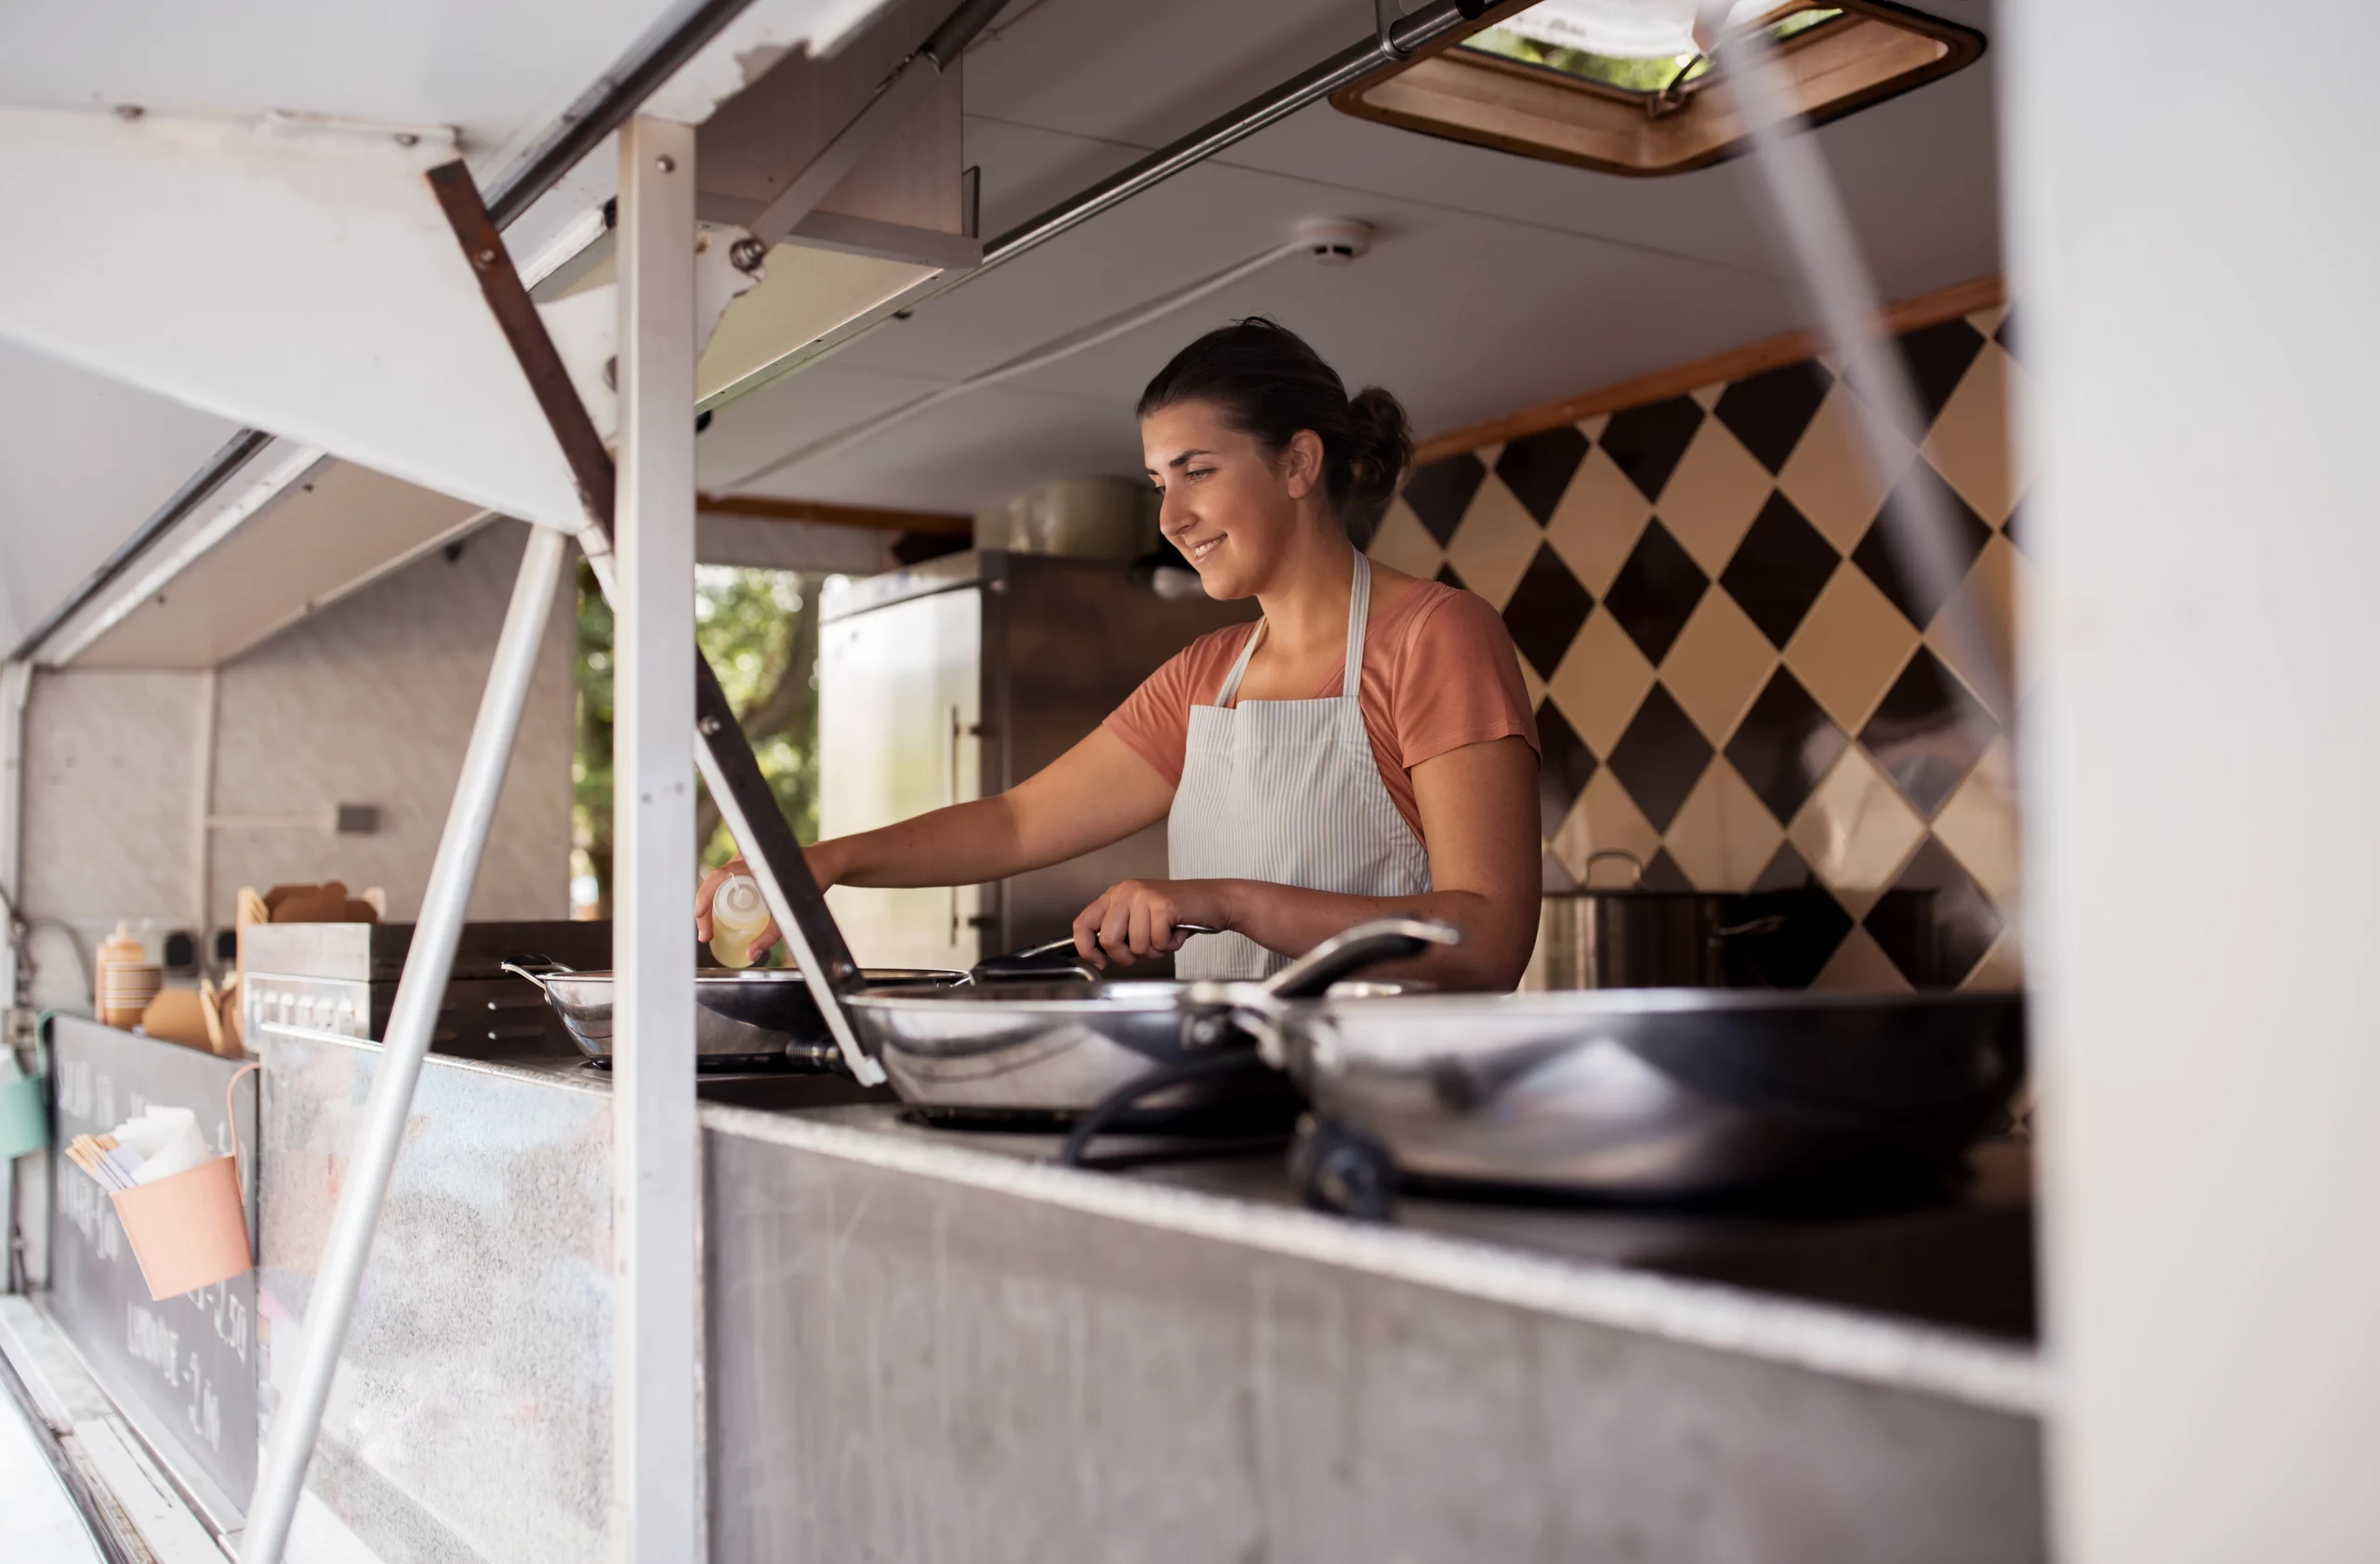 A woman working at a food truck.